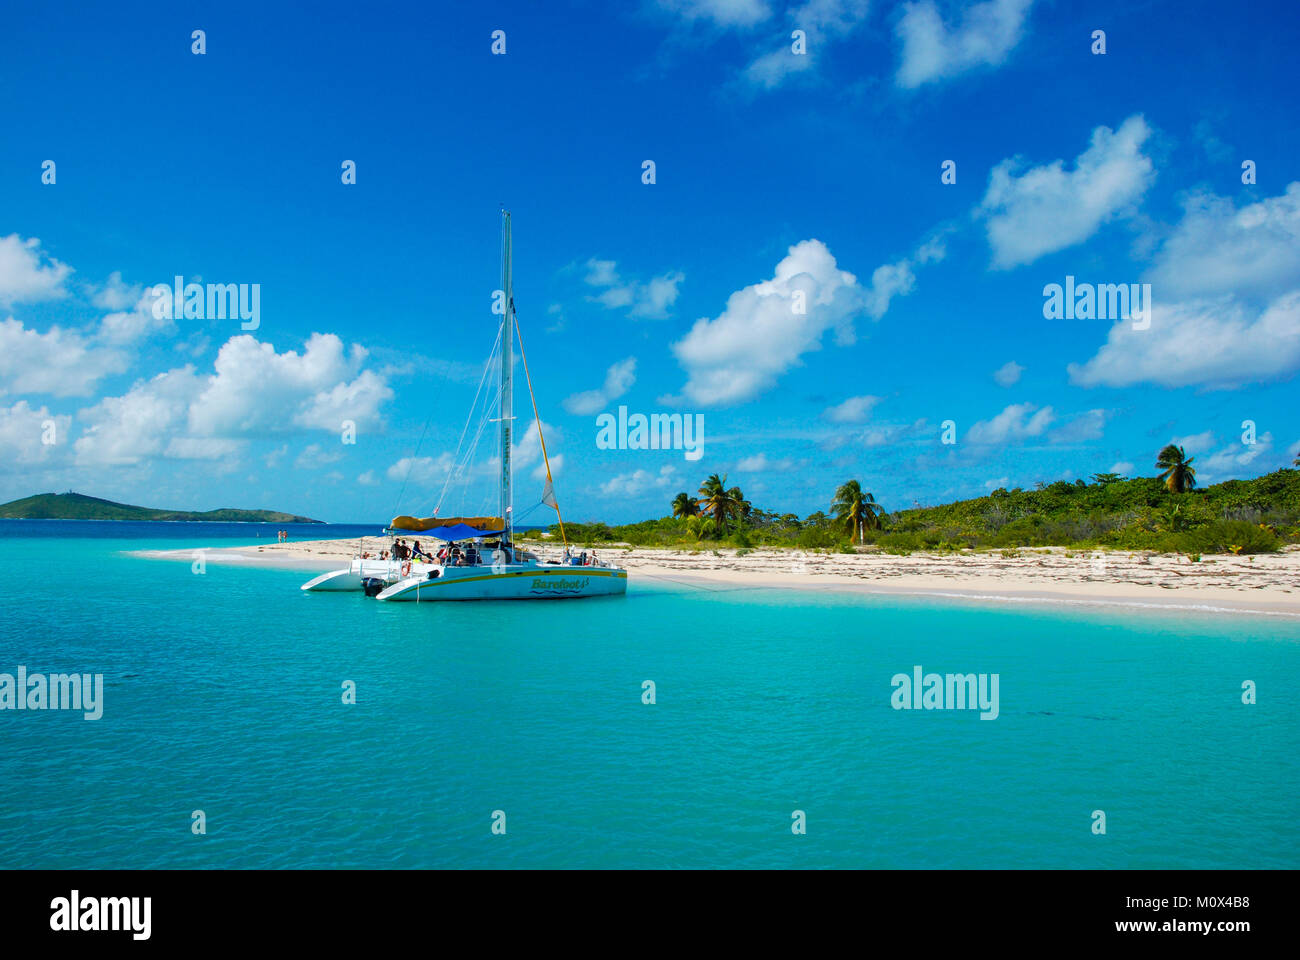 The uninhabited Caribbean island, Cayo icacos, in Puerto Rico, that forms part of the Cordillera Keys Nature Reserve with catamaran boat moored Stock Photo